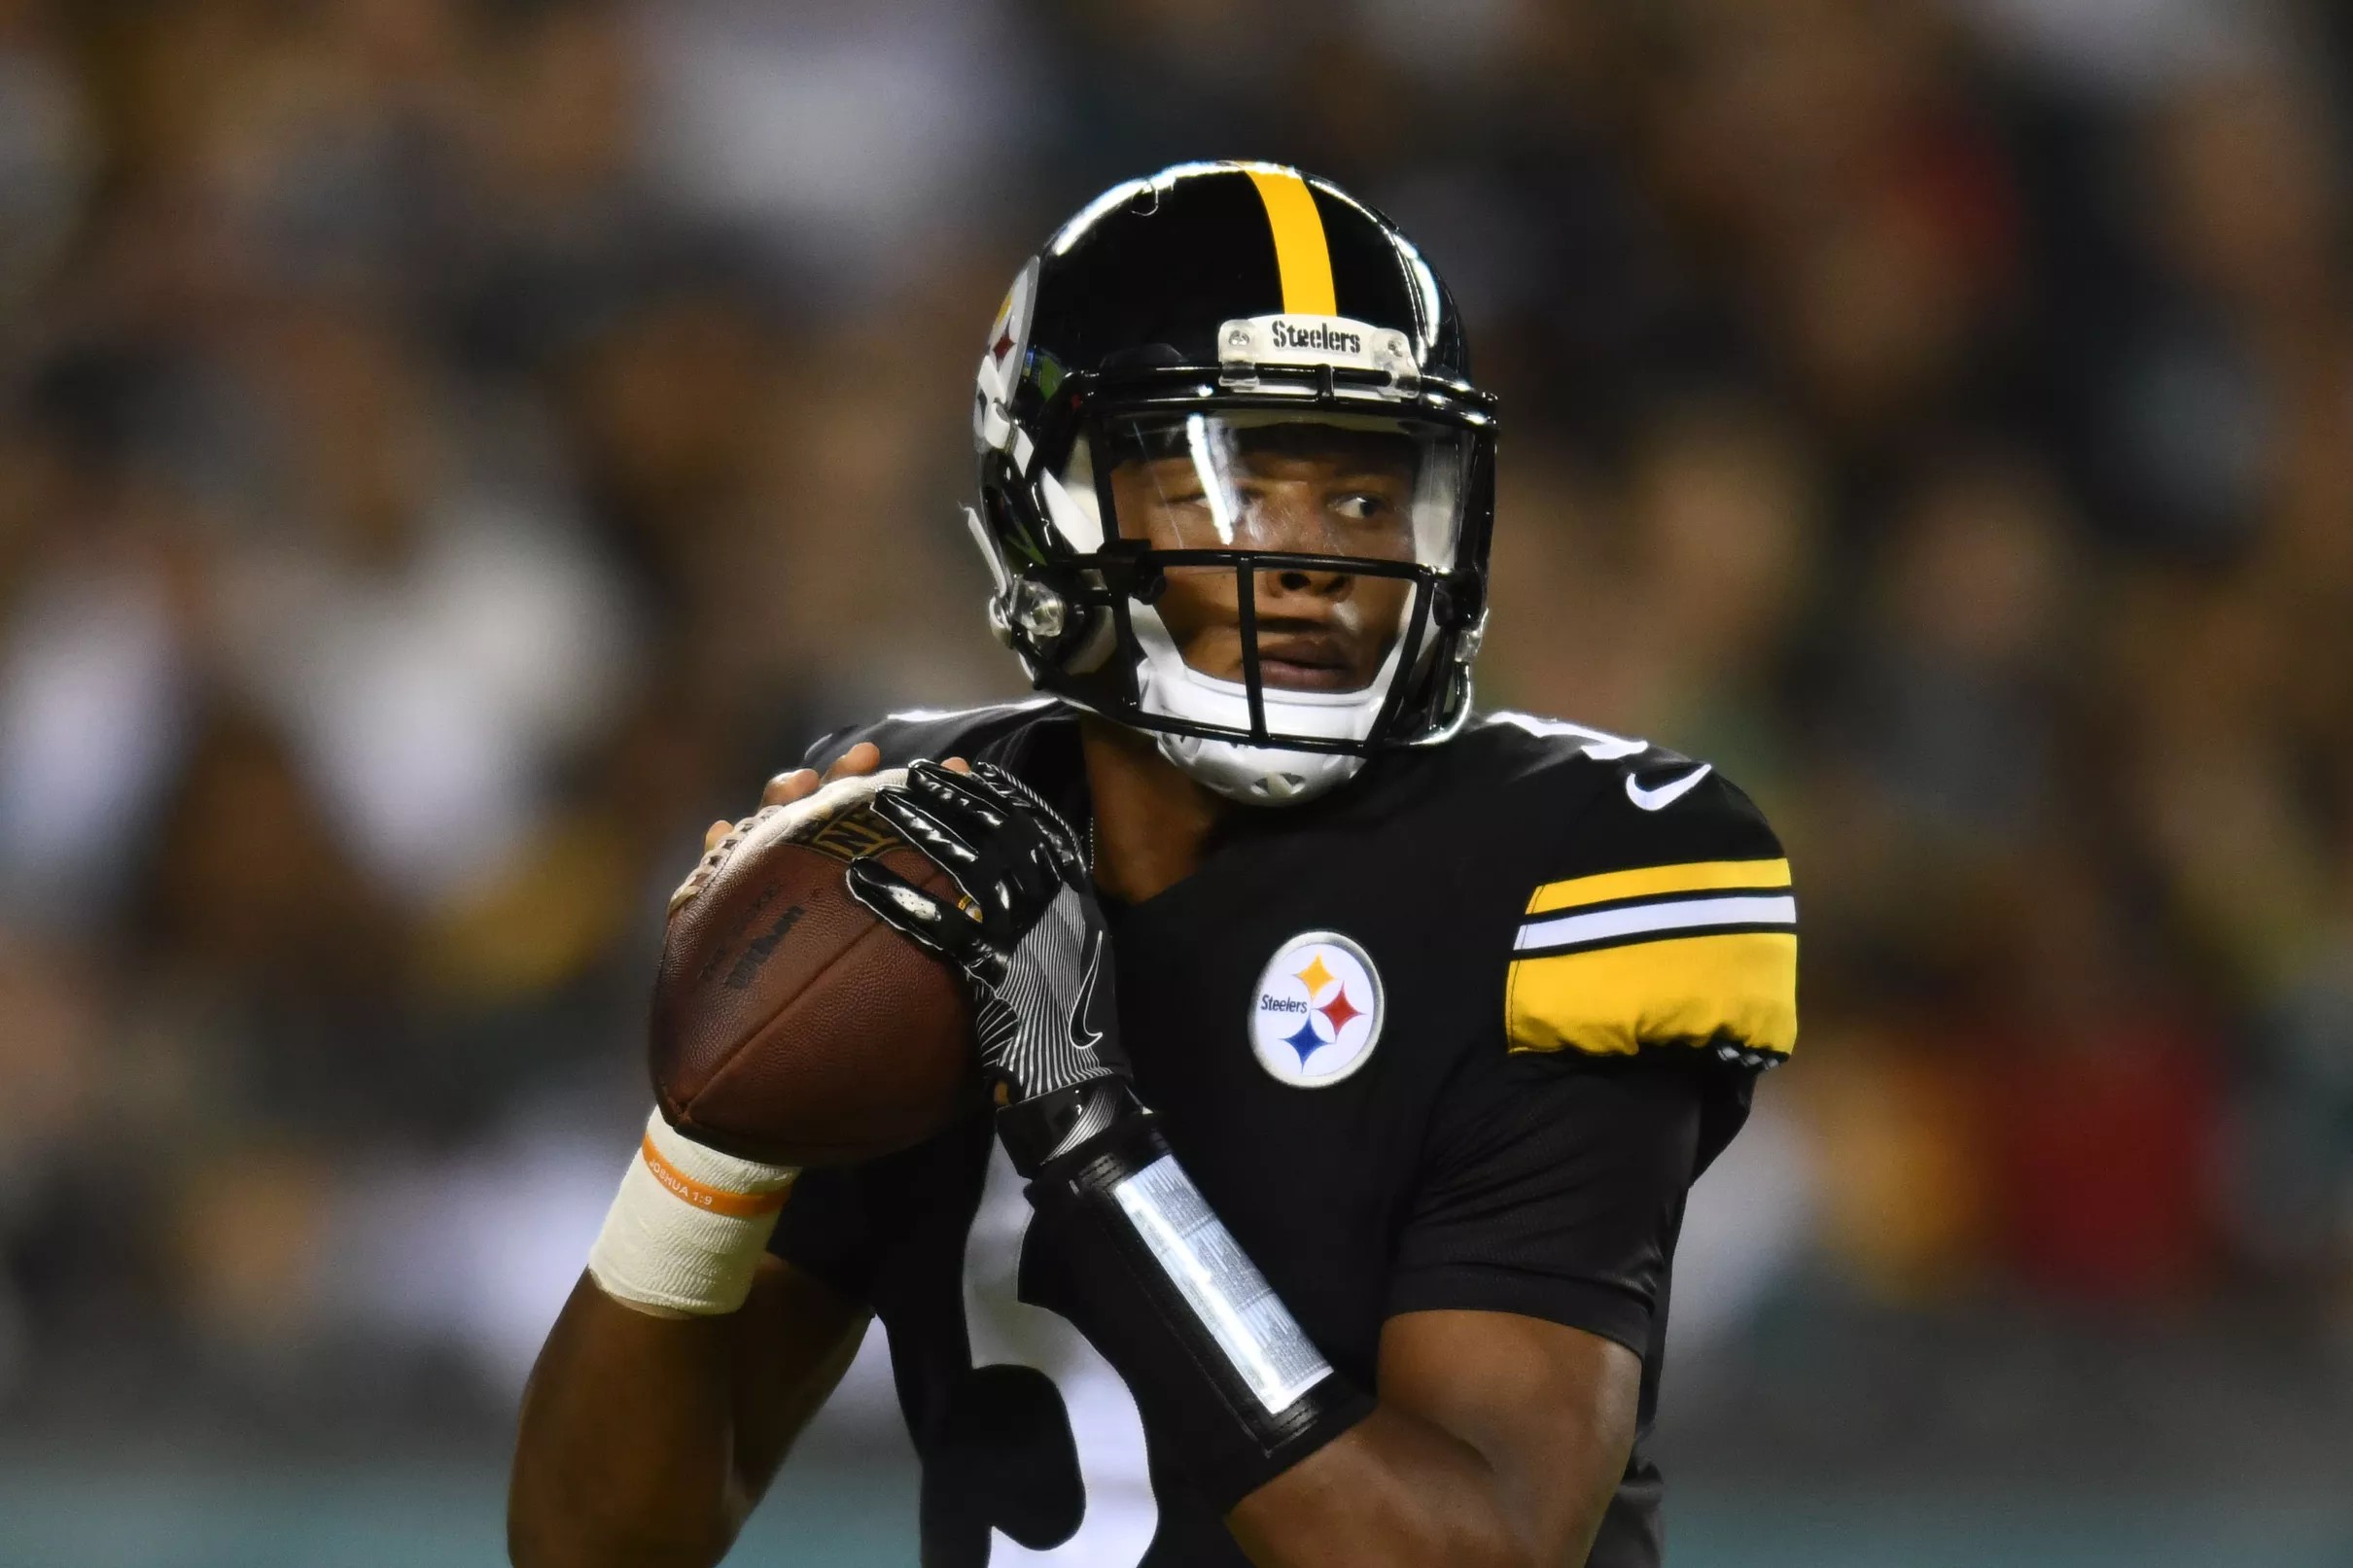 The Steelers’ improving quarterback depth could open up doors of